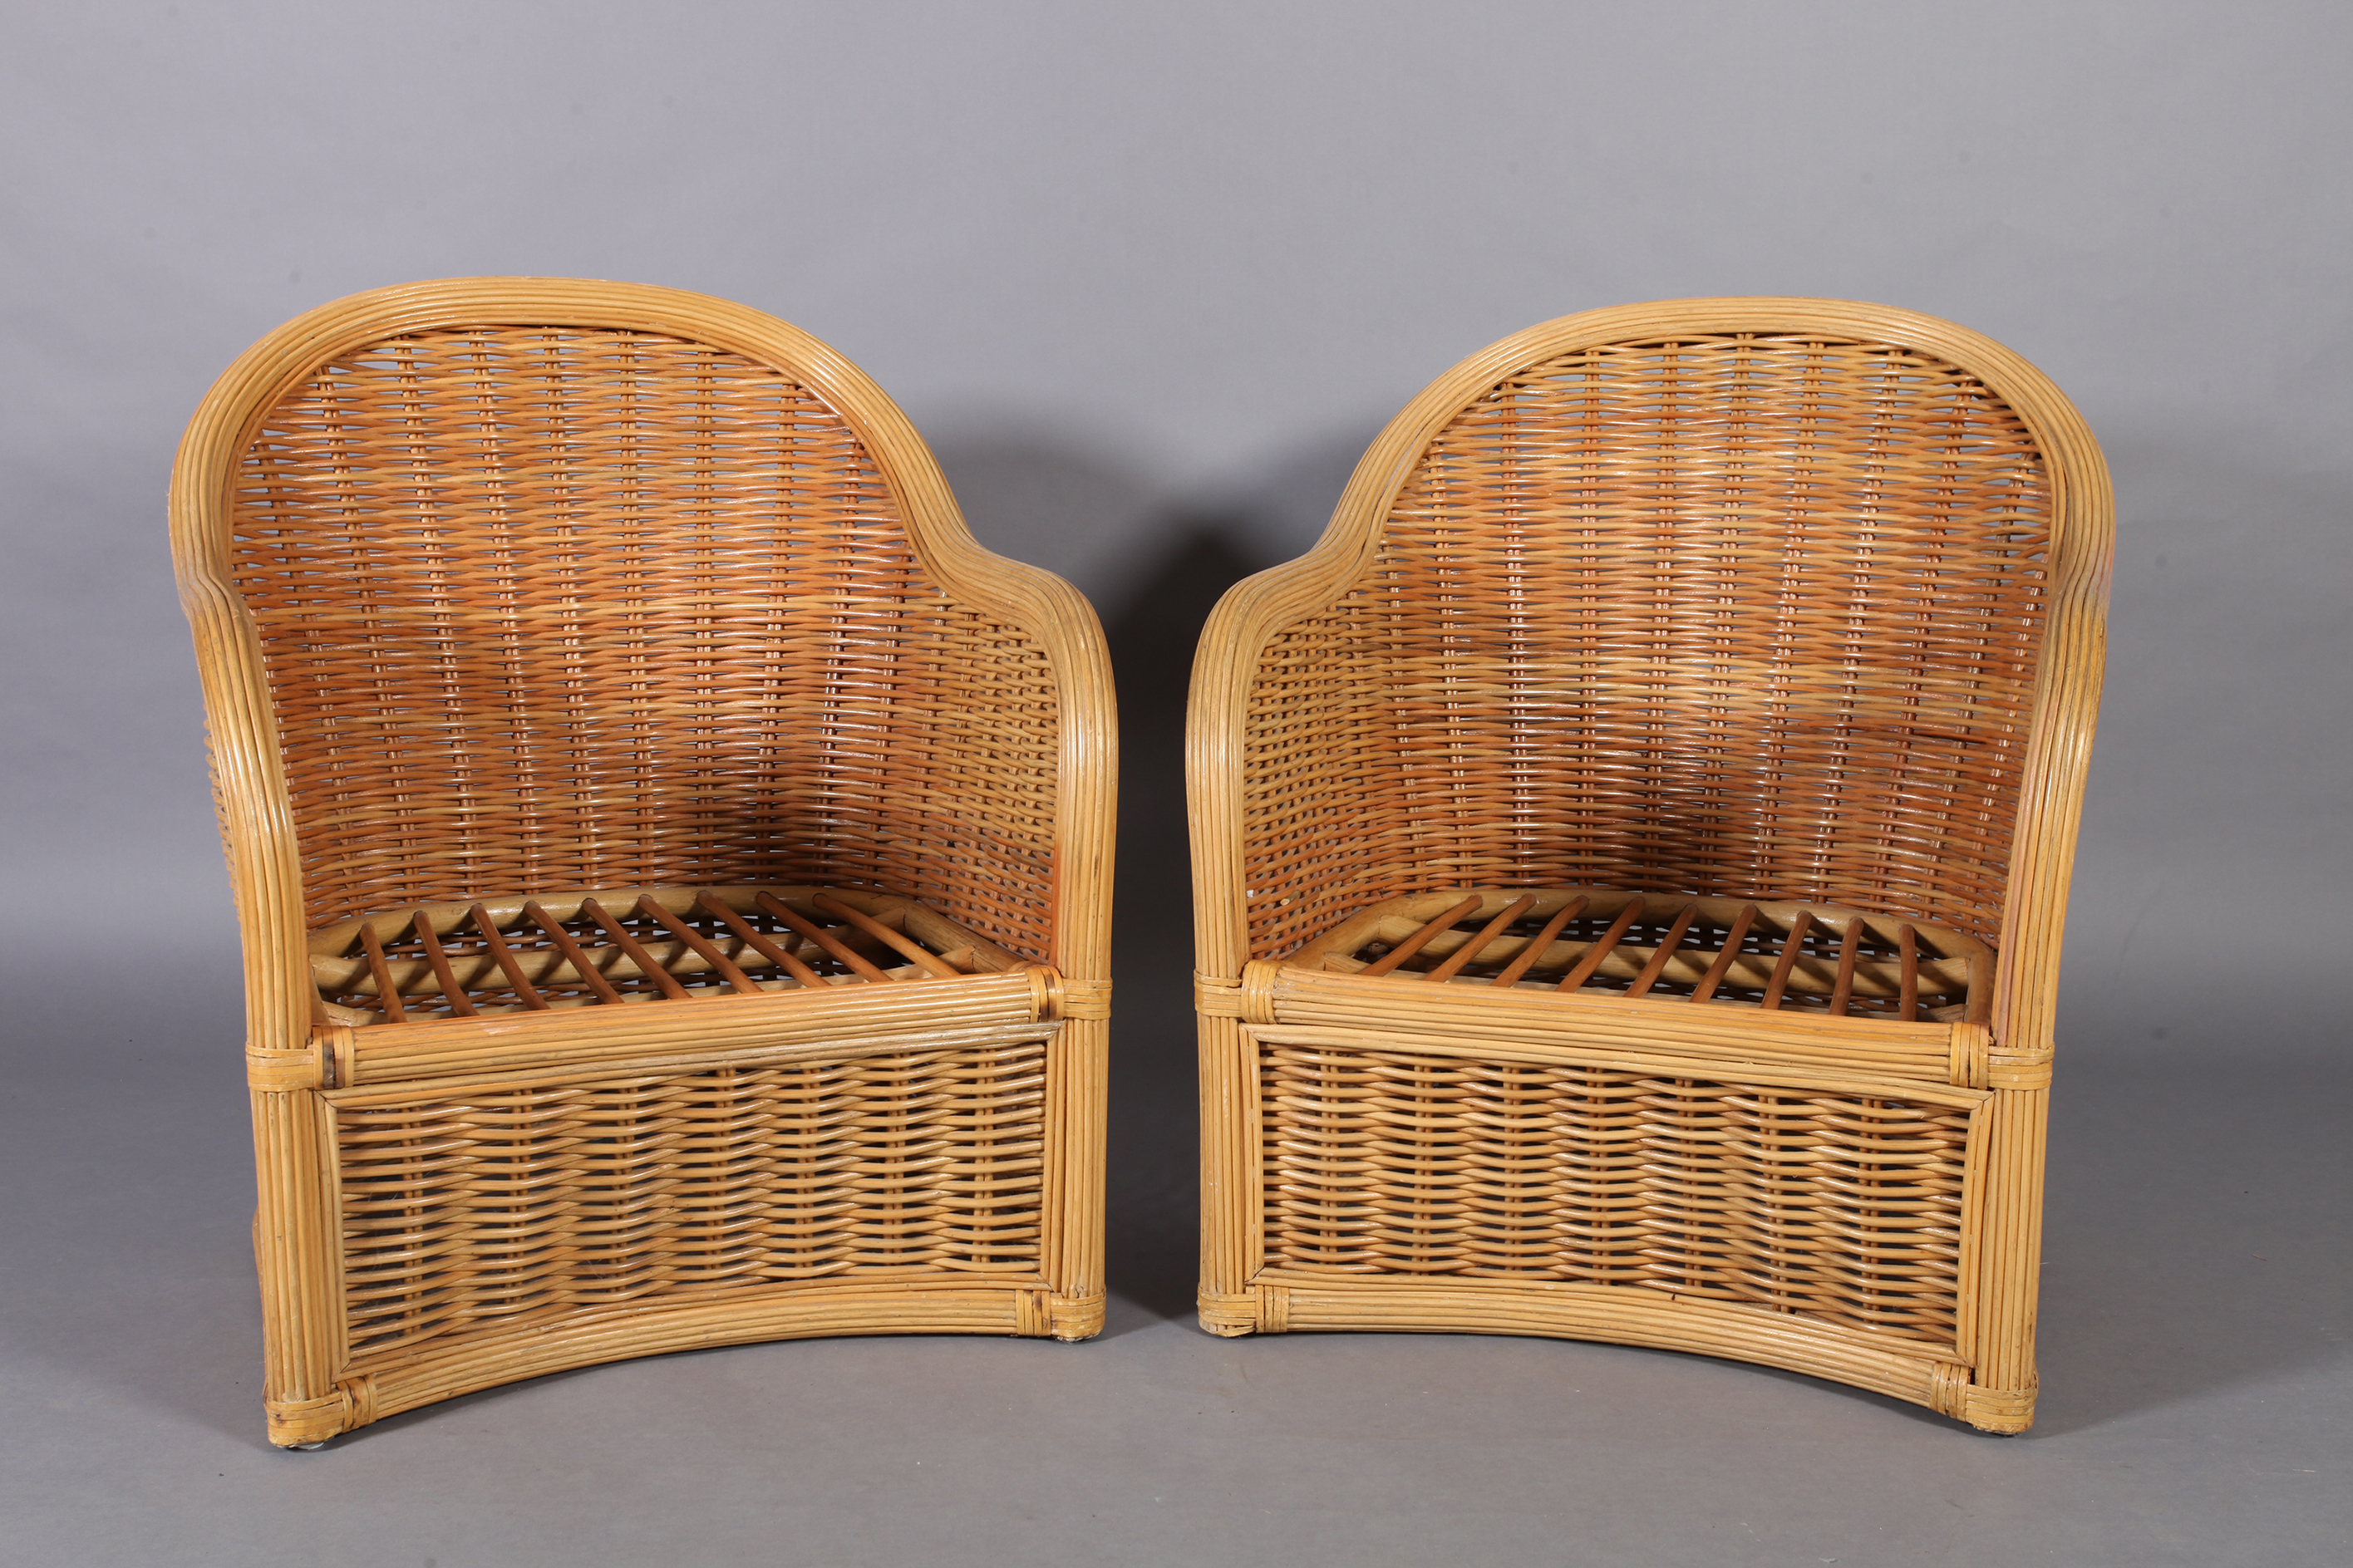 A pair of wicker elbow chairs with loose cushions - Image 5 of 5